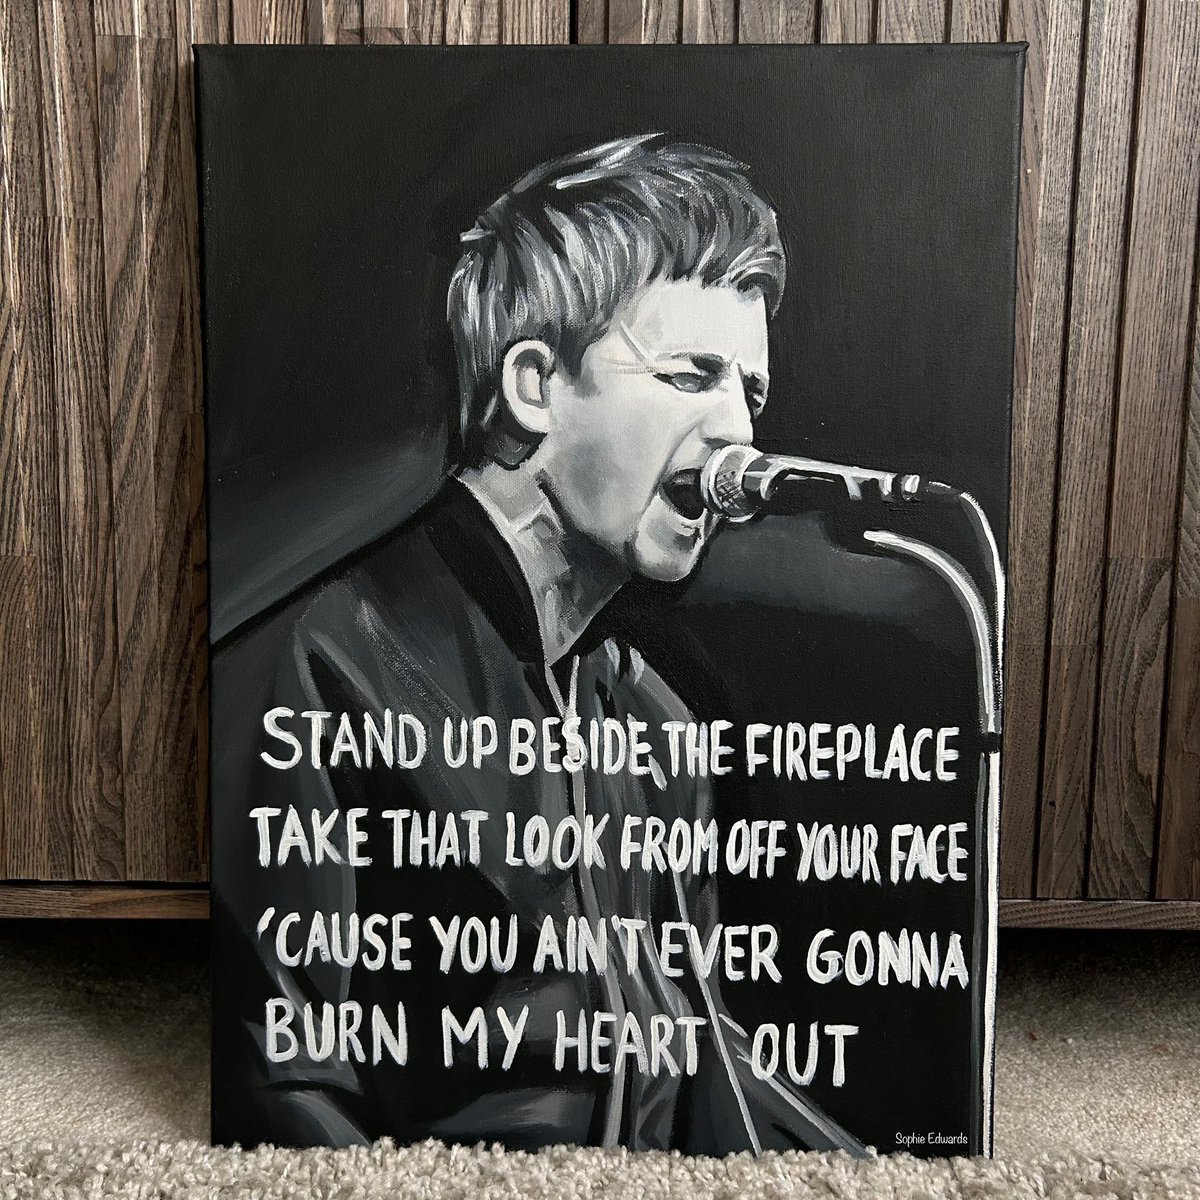 Original Noel Gallagher painting is for sale. Message me if you are interested 🎤 📧sophieedwardsart@hotmail.com